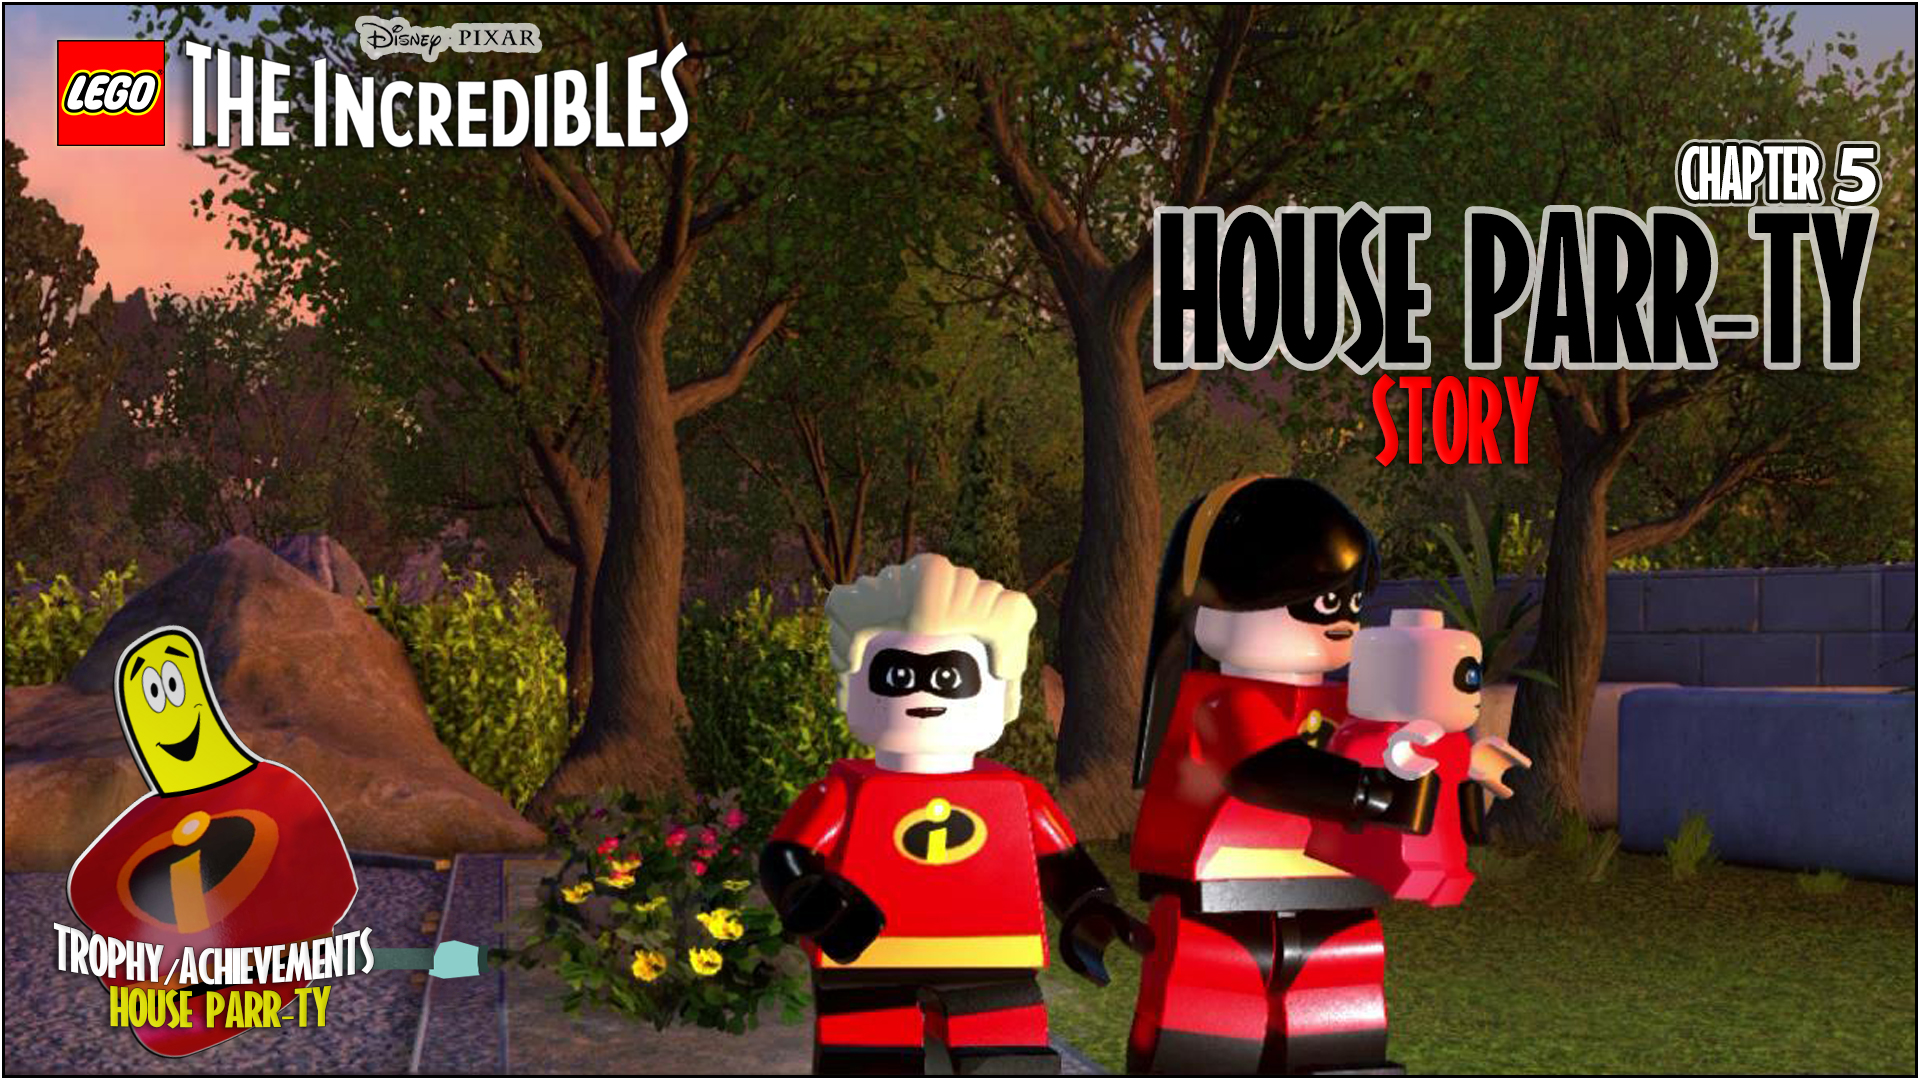 Lego The Incredibles: Chapter 5 / House Parr-ty STORY – HTG